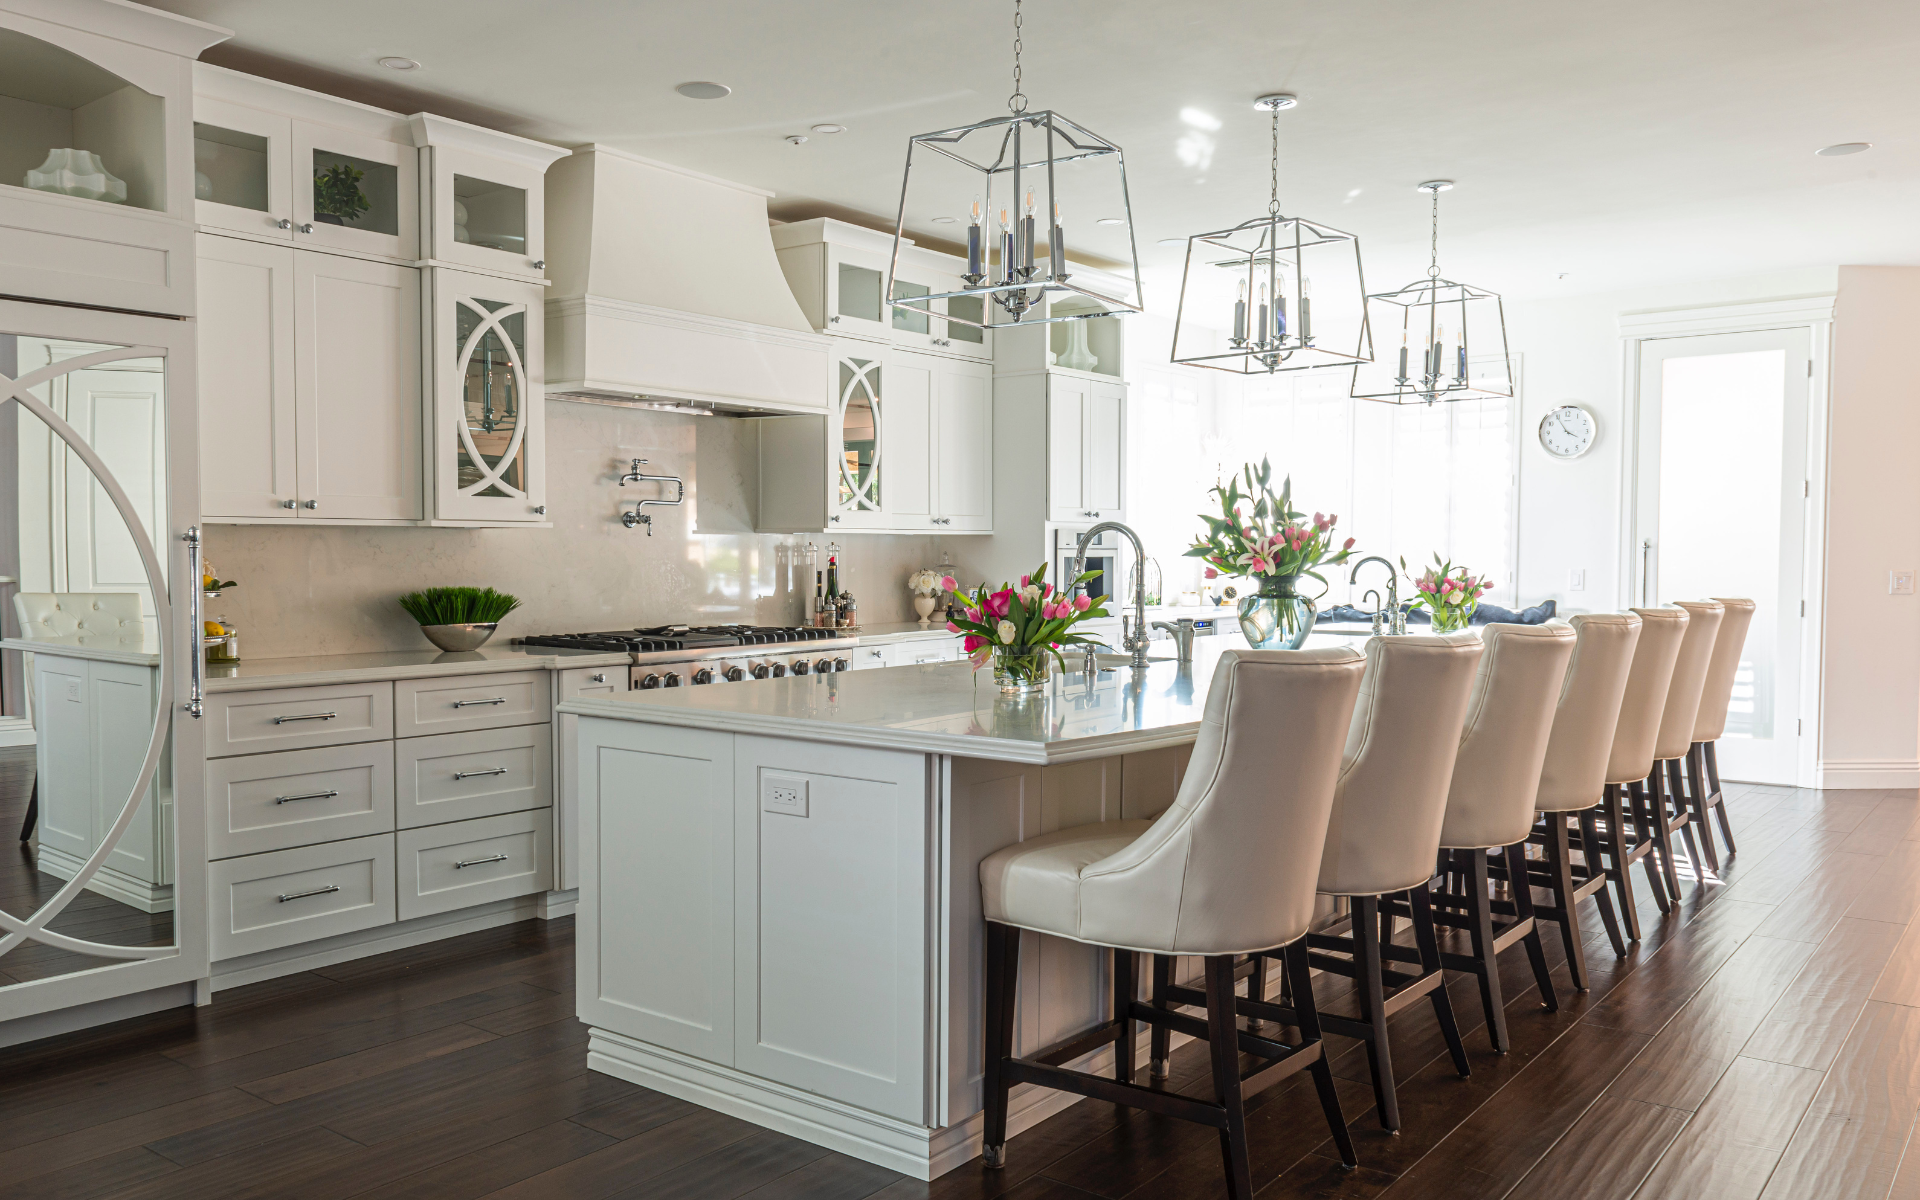 Classic style kitchen with white cabinets and countertops